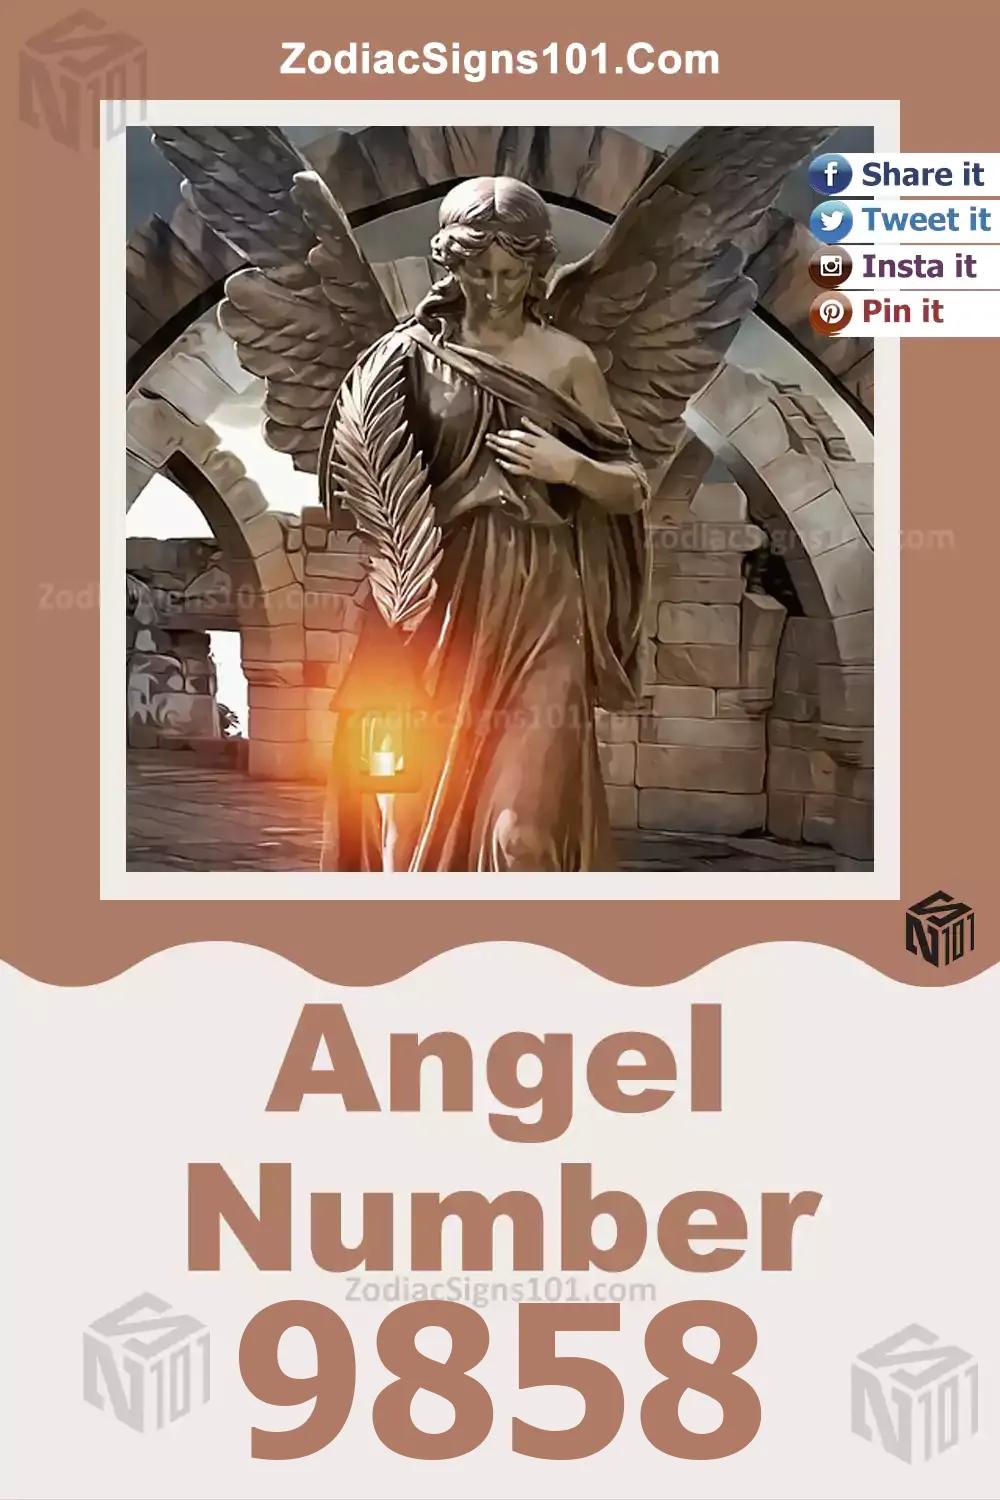 9858 Angel Number Meaning